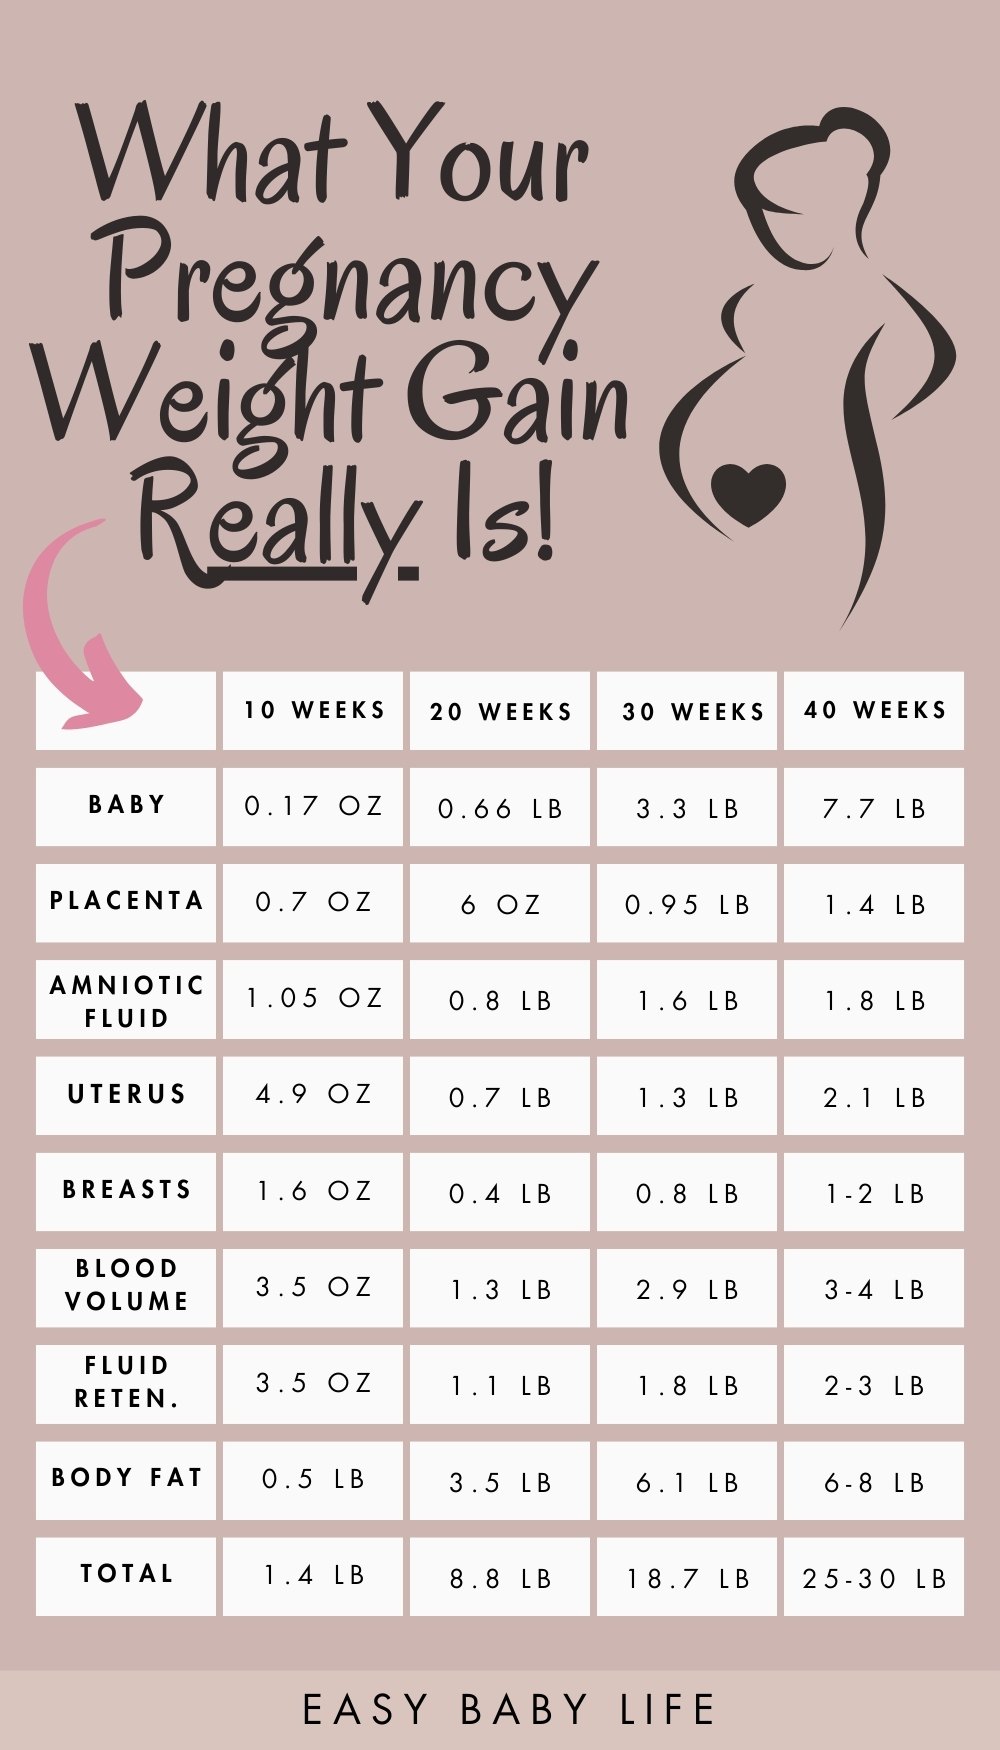 The Weight Gain During Pregnancy: A Fascinating Breakdown